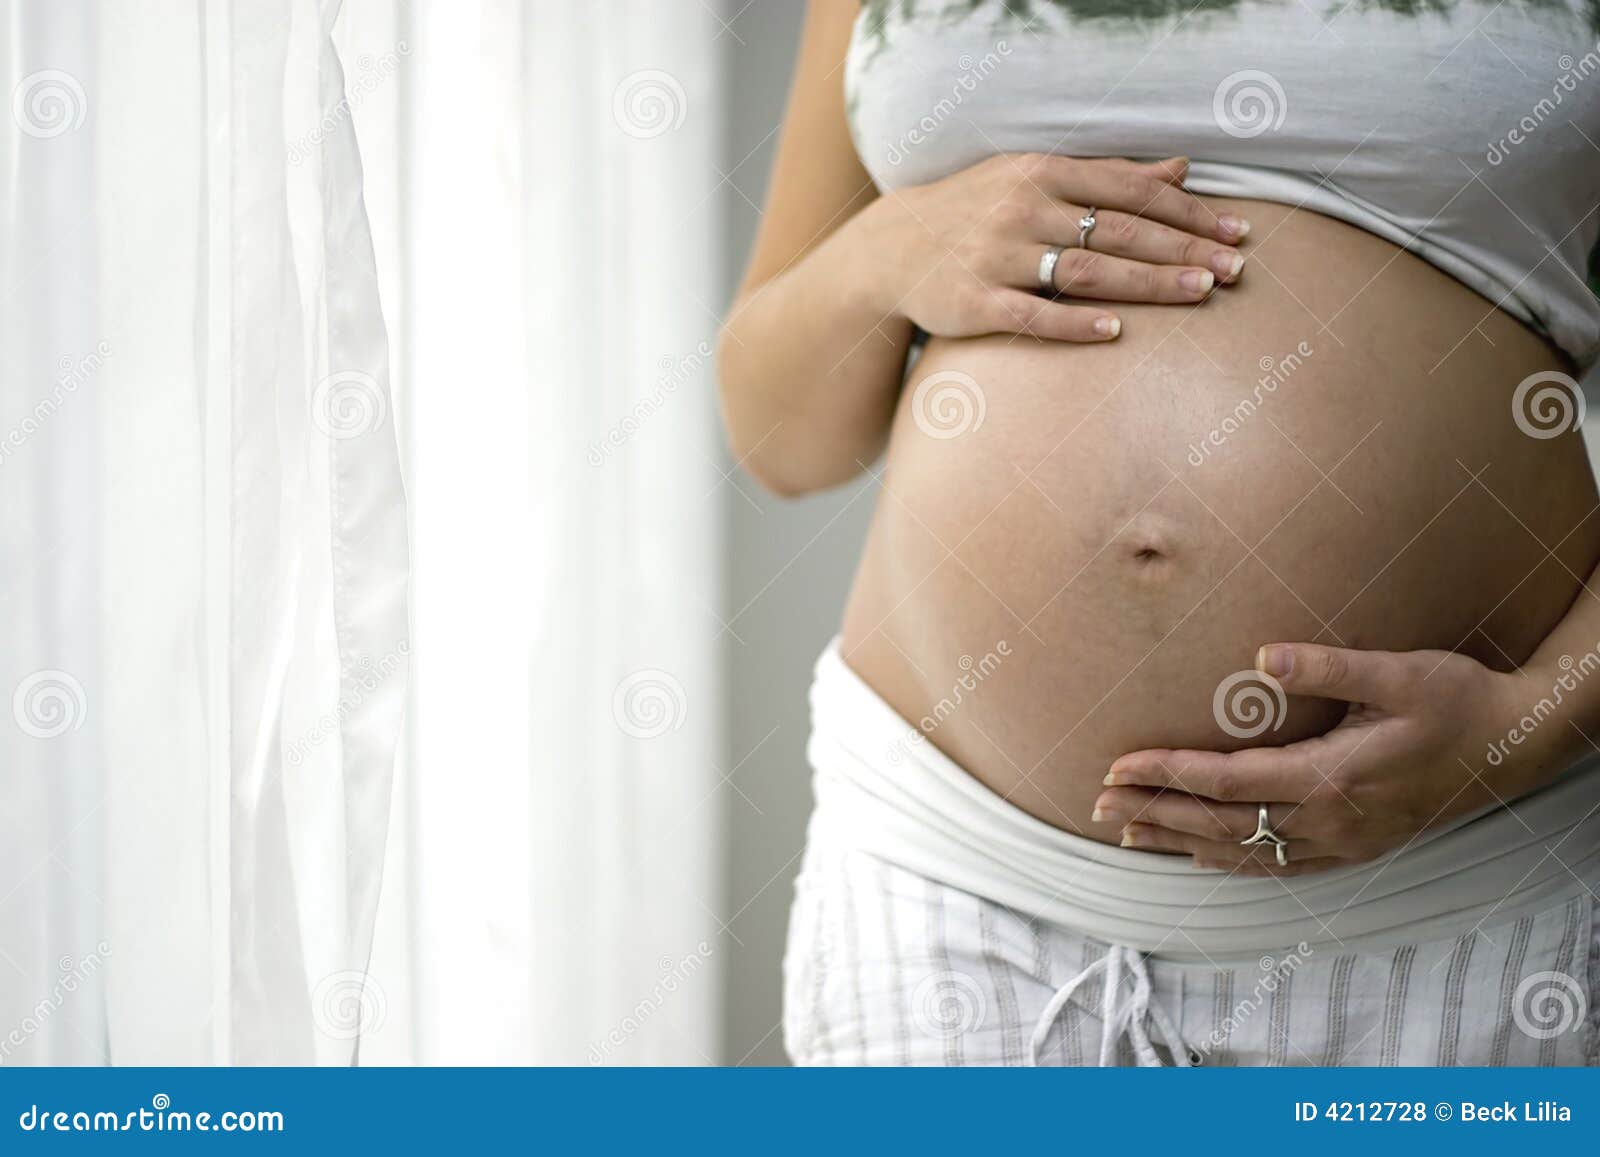 A Look Into the Future: What Will the Gravidkjole Industry Look Like in 10 Years? human-pregnancy-4212728